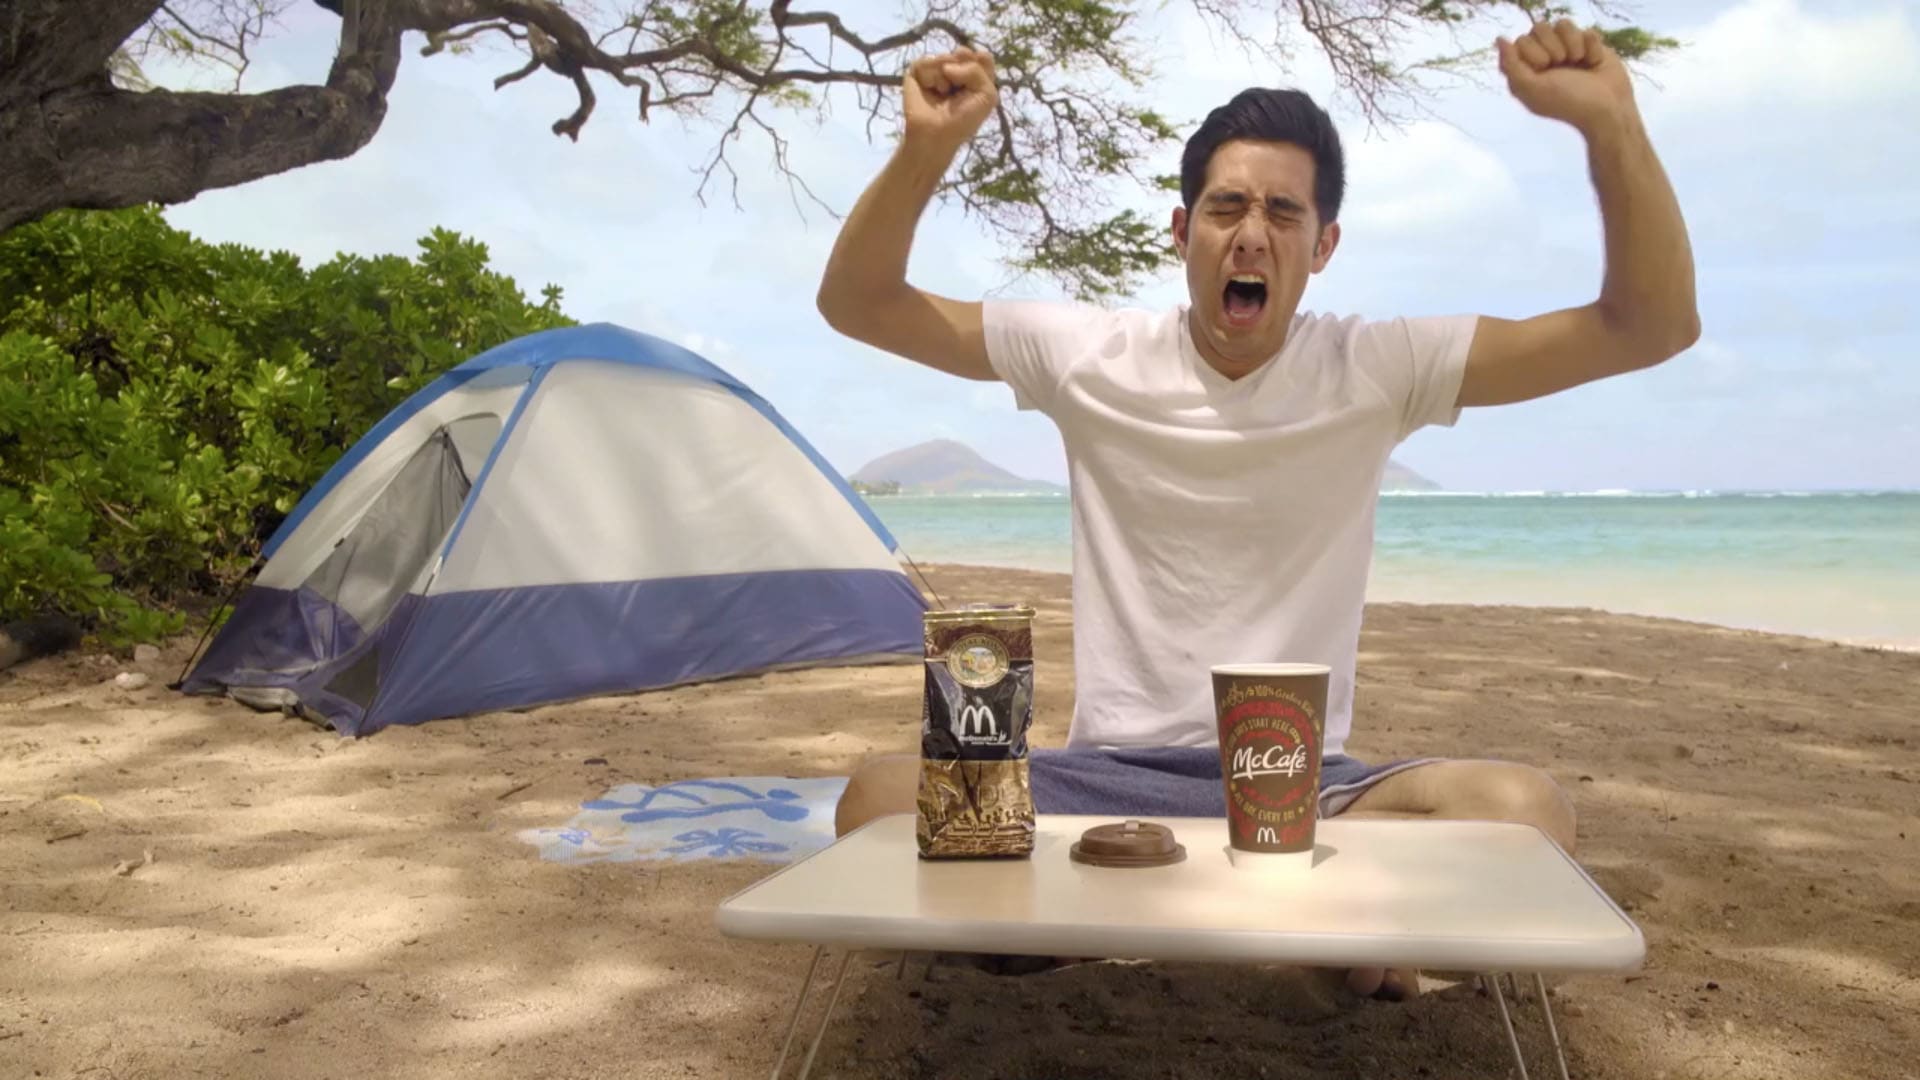 McDonald’s of Hawaii - Amazing Ingredients Campaign - How Zach King starts his mornings